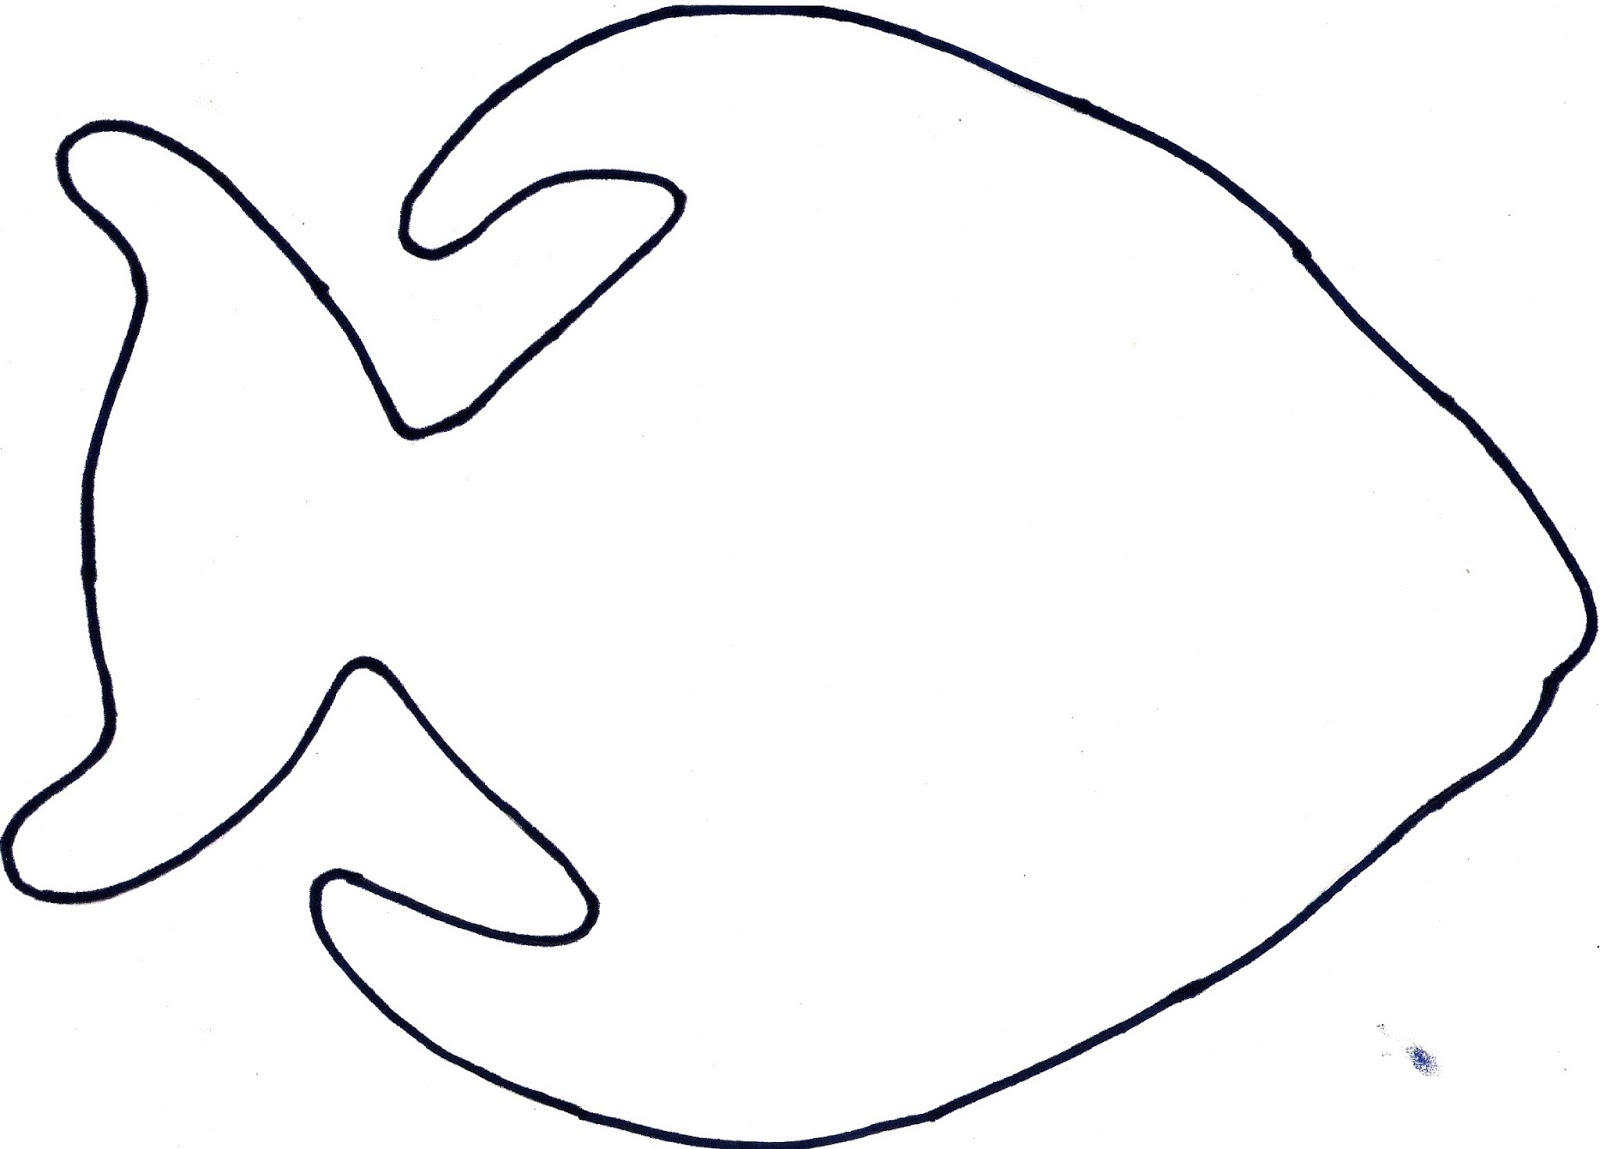 Simple Fish Drawings - ClipArt Best